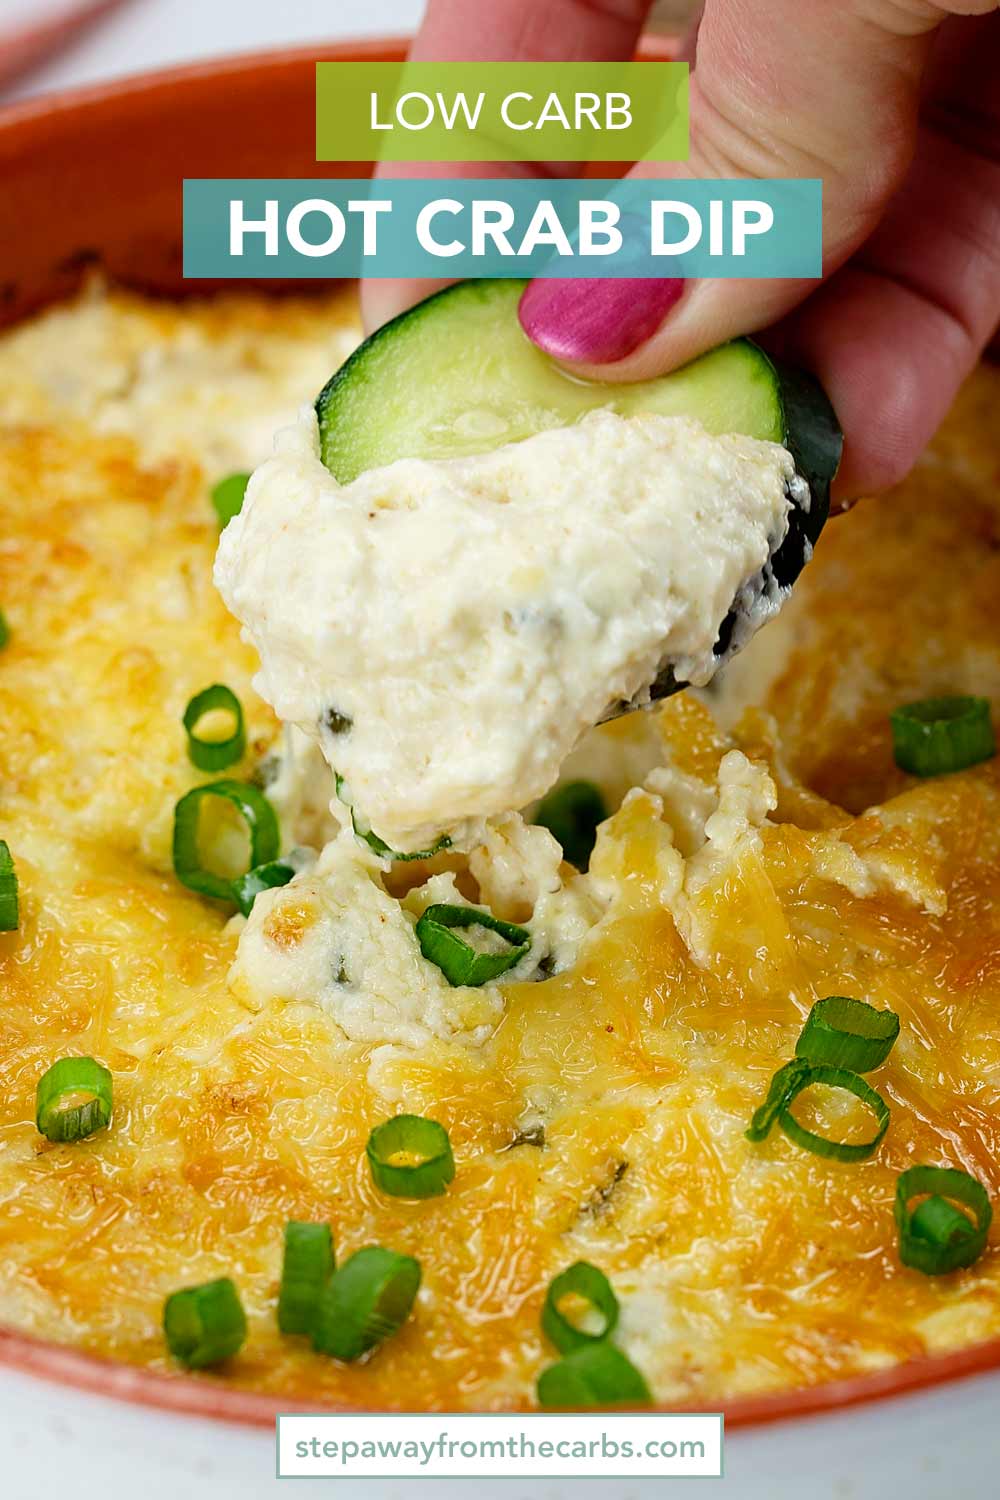 Low Carb Hot Crab Dip - rich, creamy and indulgent! LCHF and keto recipe with video tutorial.